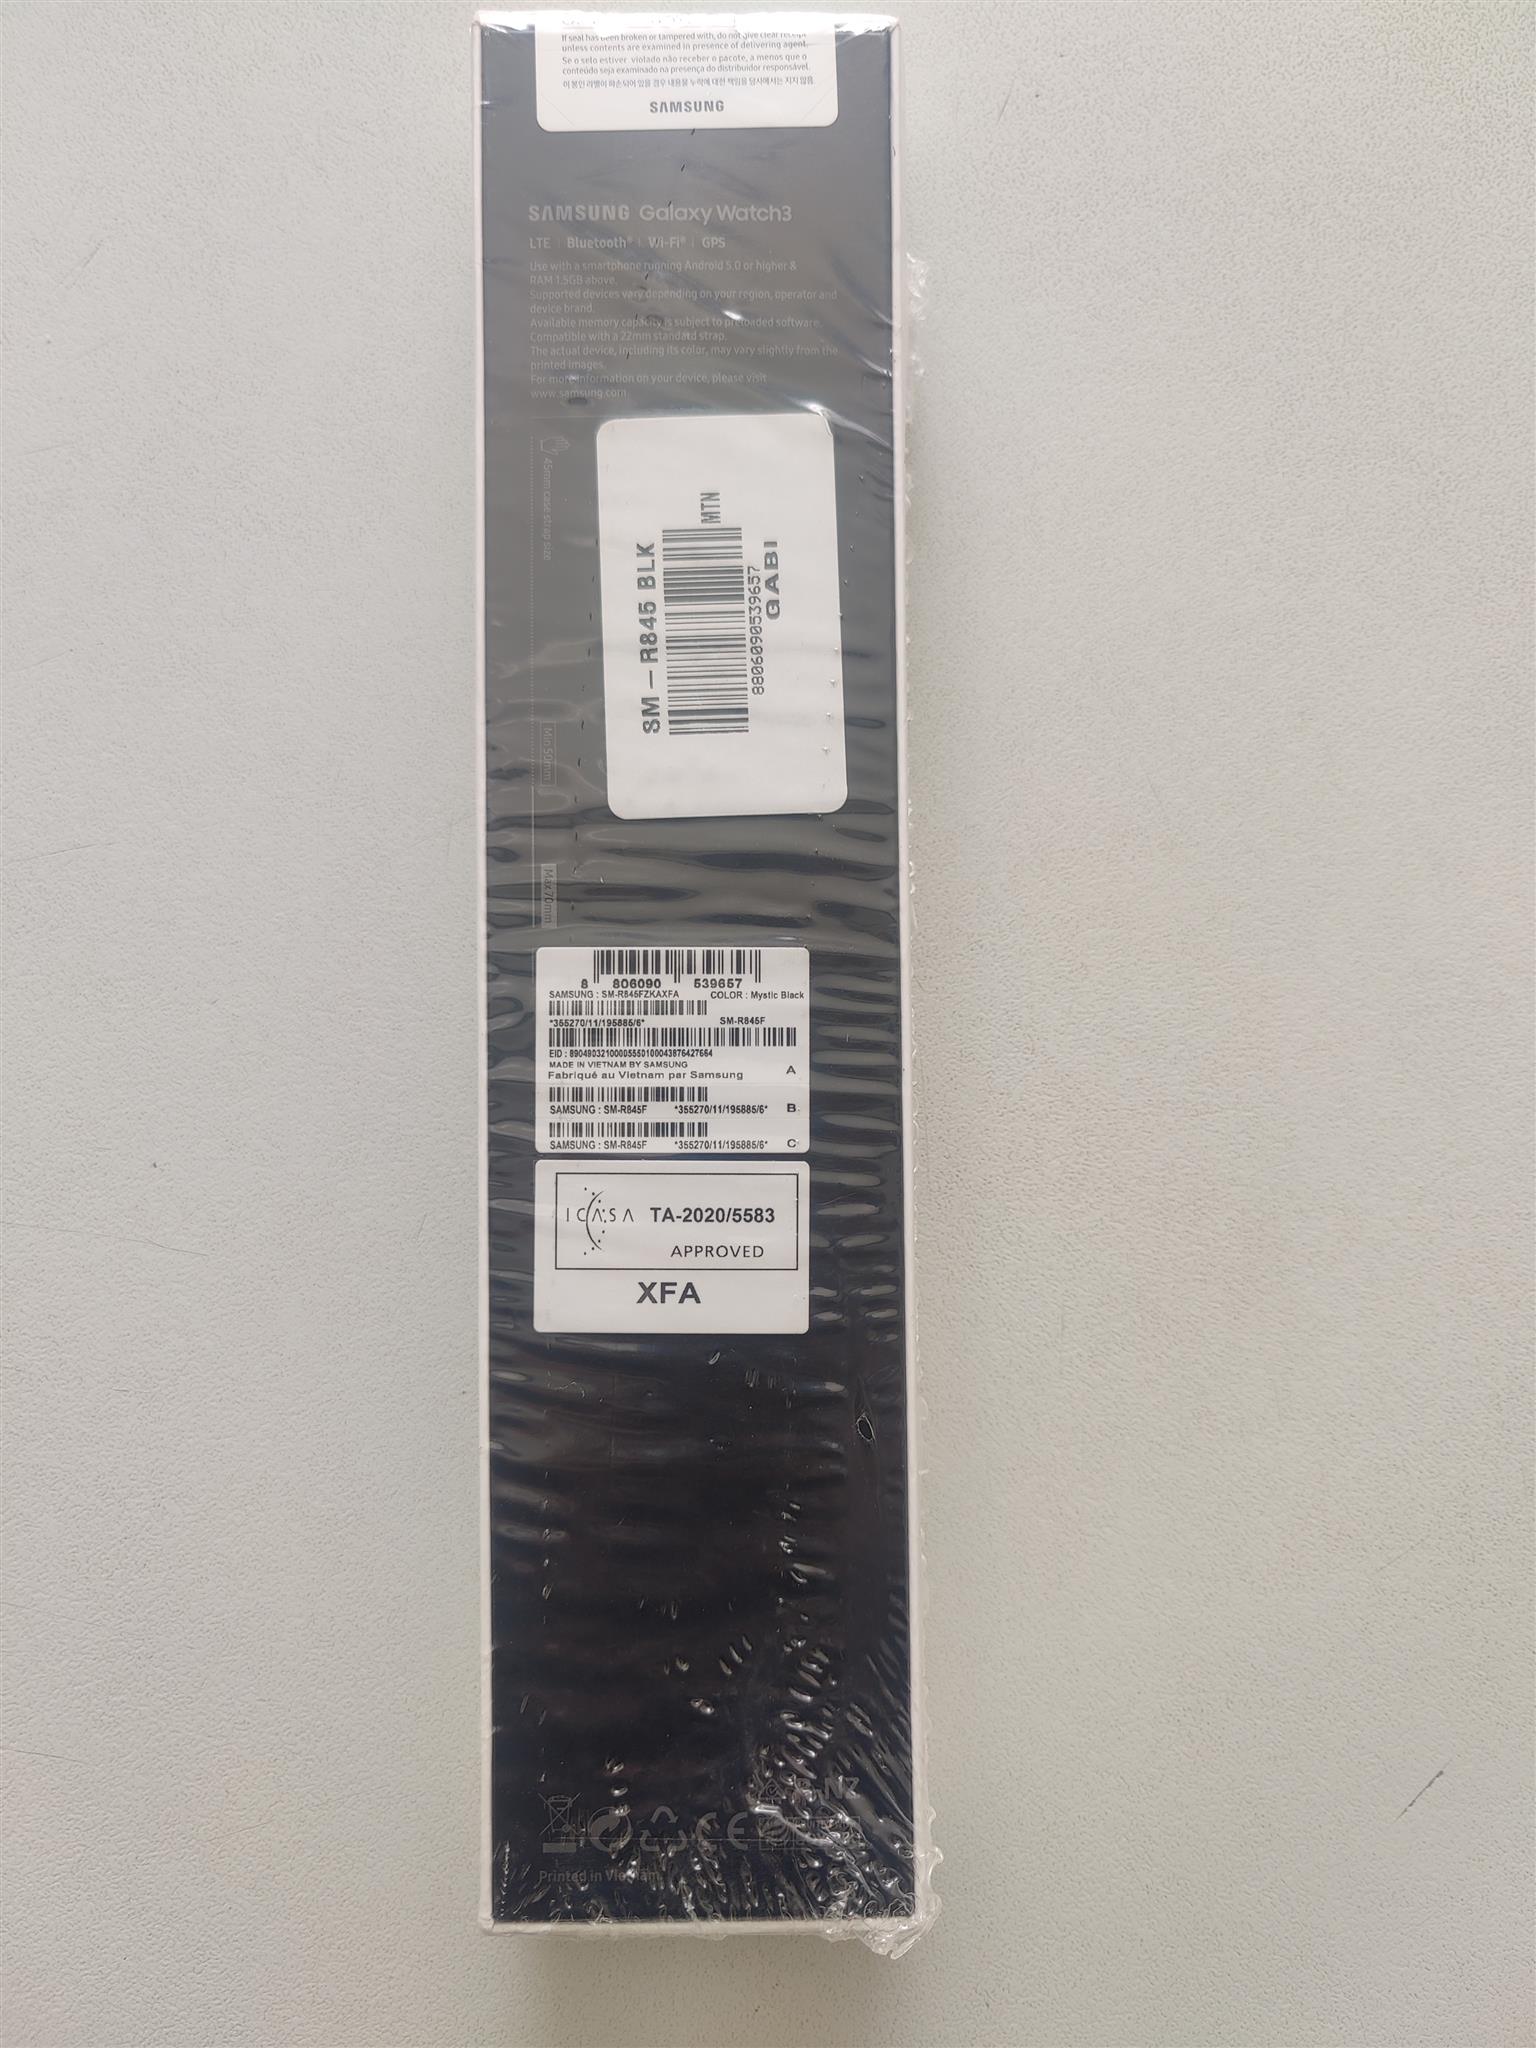 Samsung Galaxy watch 3 Brand New Sealed in the box Price 